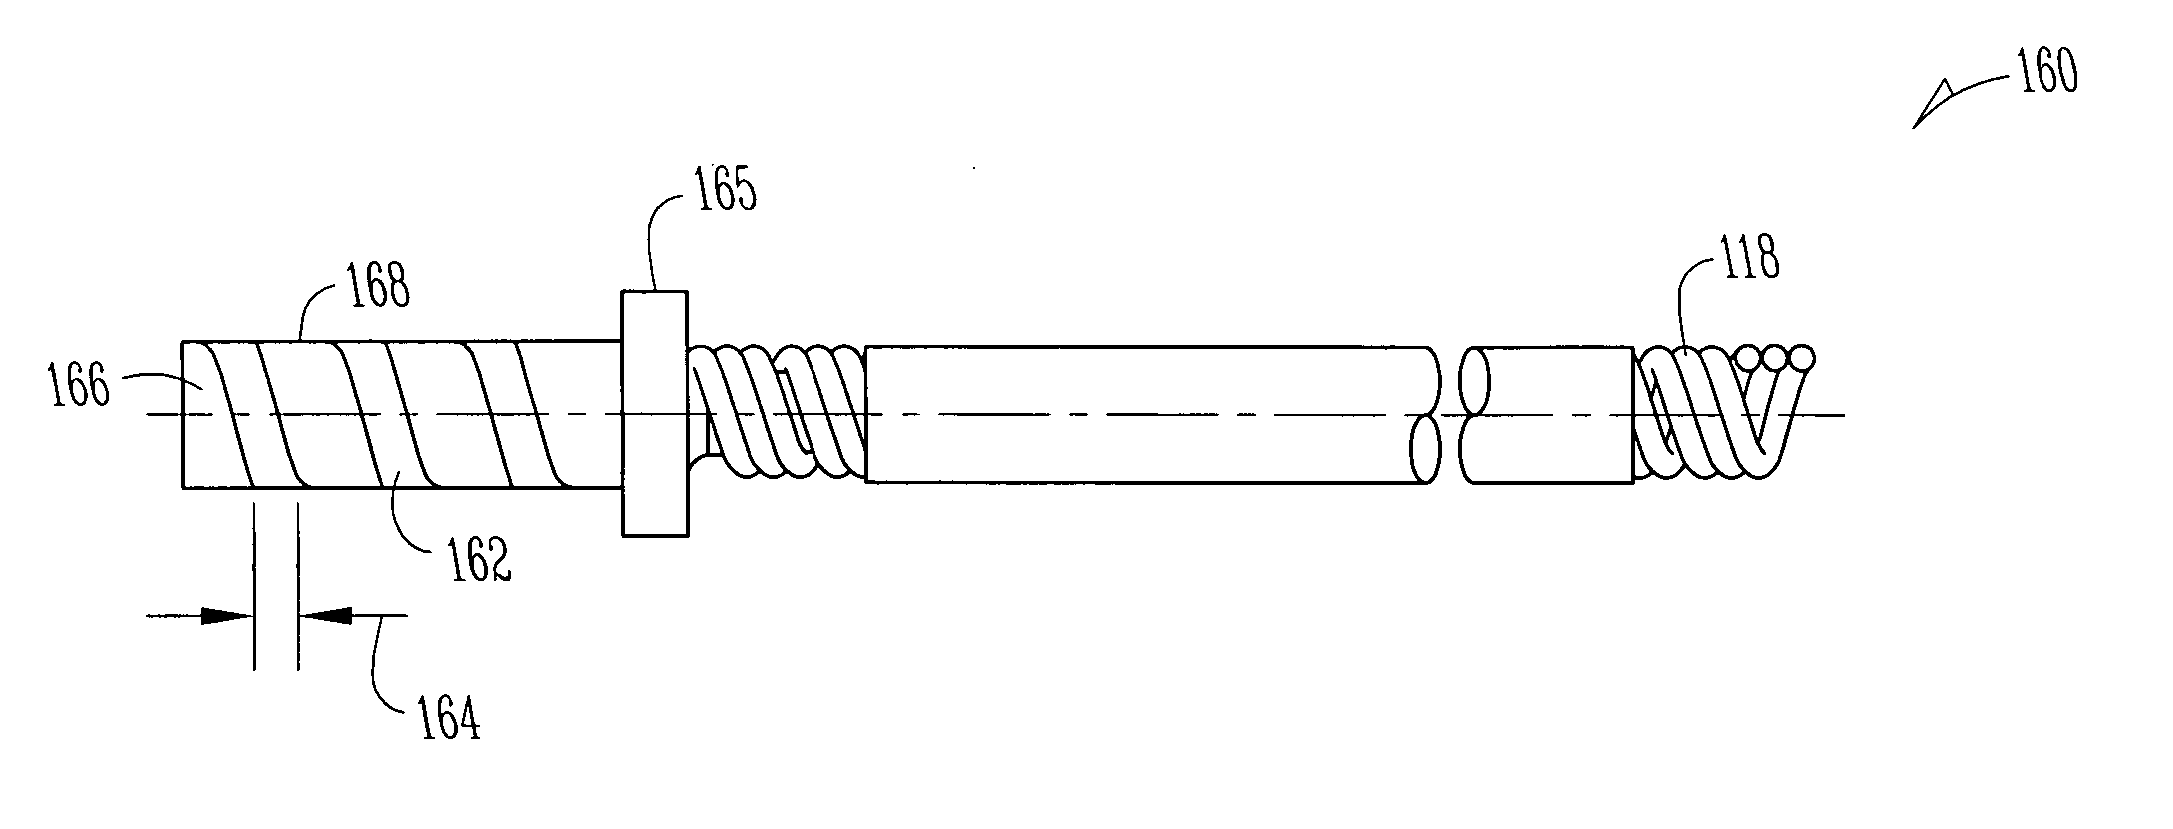 Extendable and retractable lead with an active fixation assembly